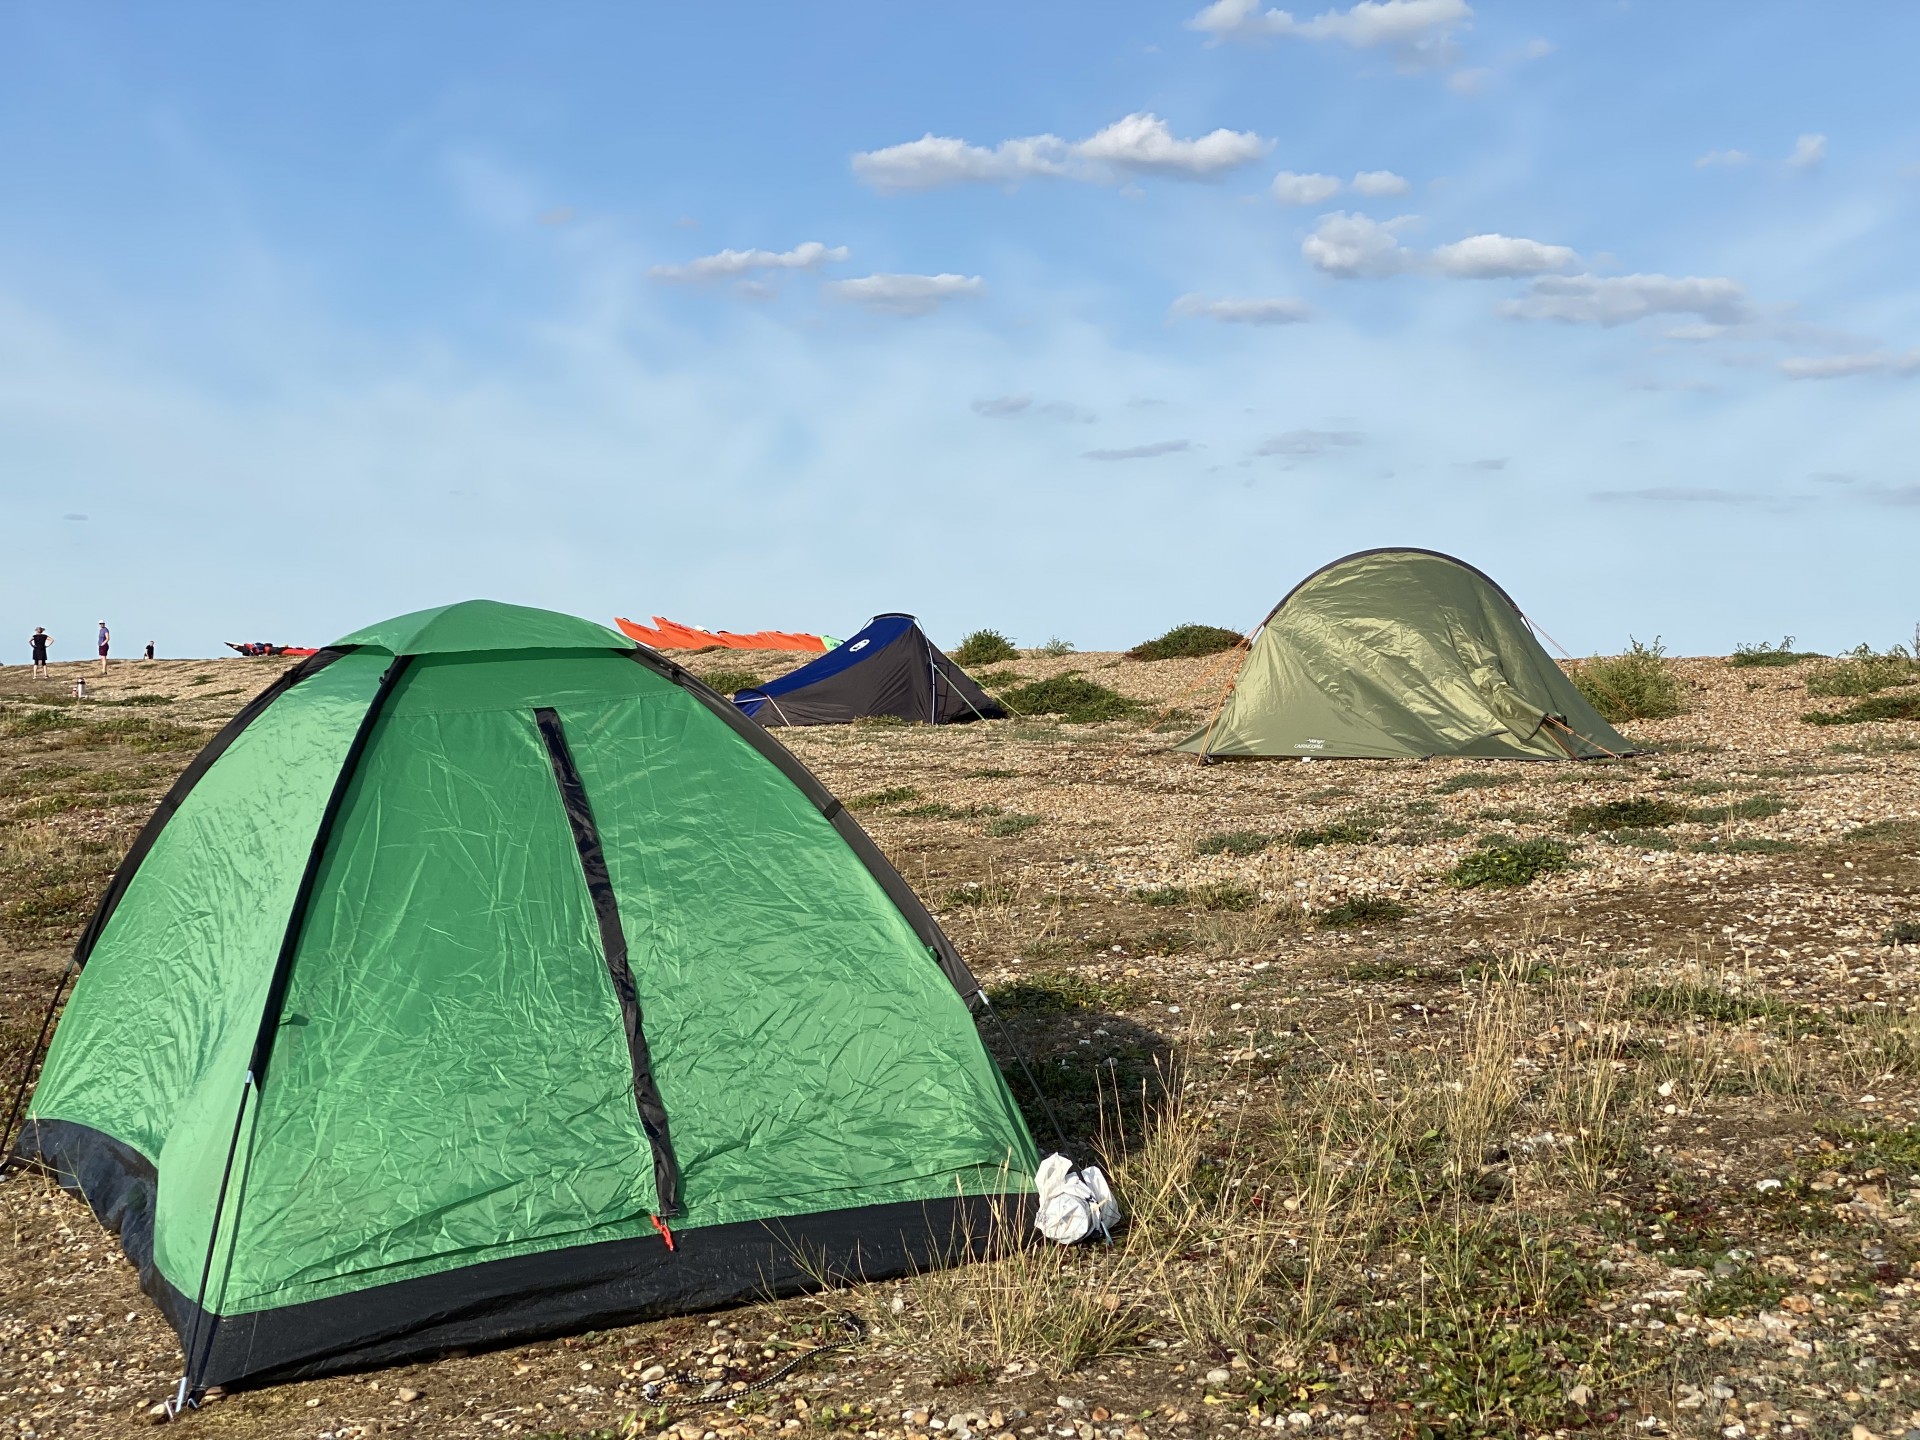 Green tents erected on a shingle beach for wild camping for a team building event